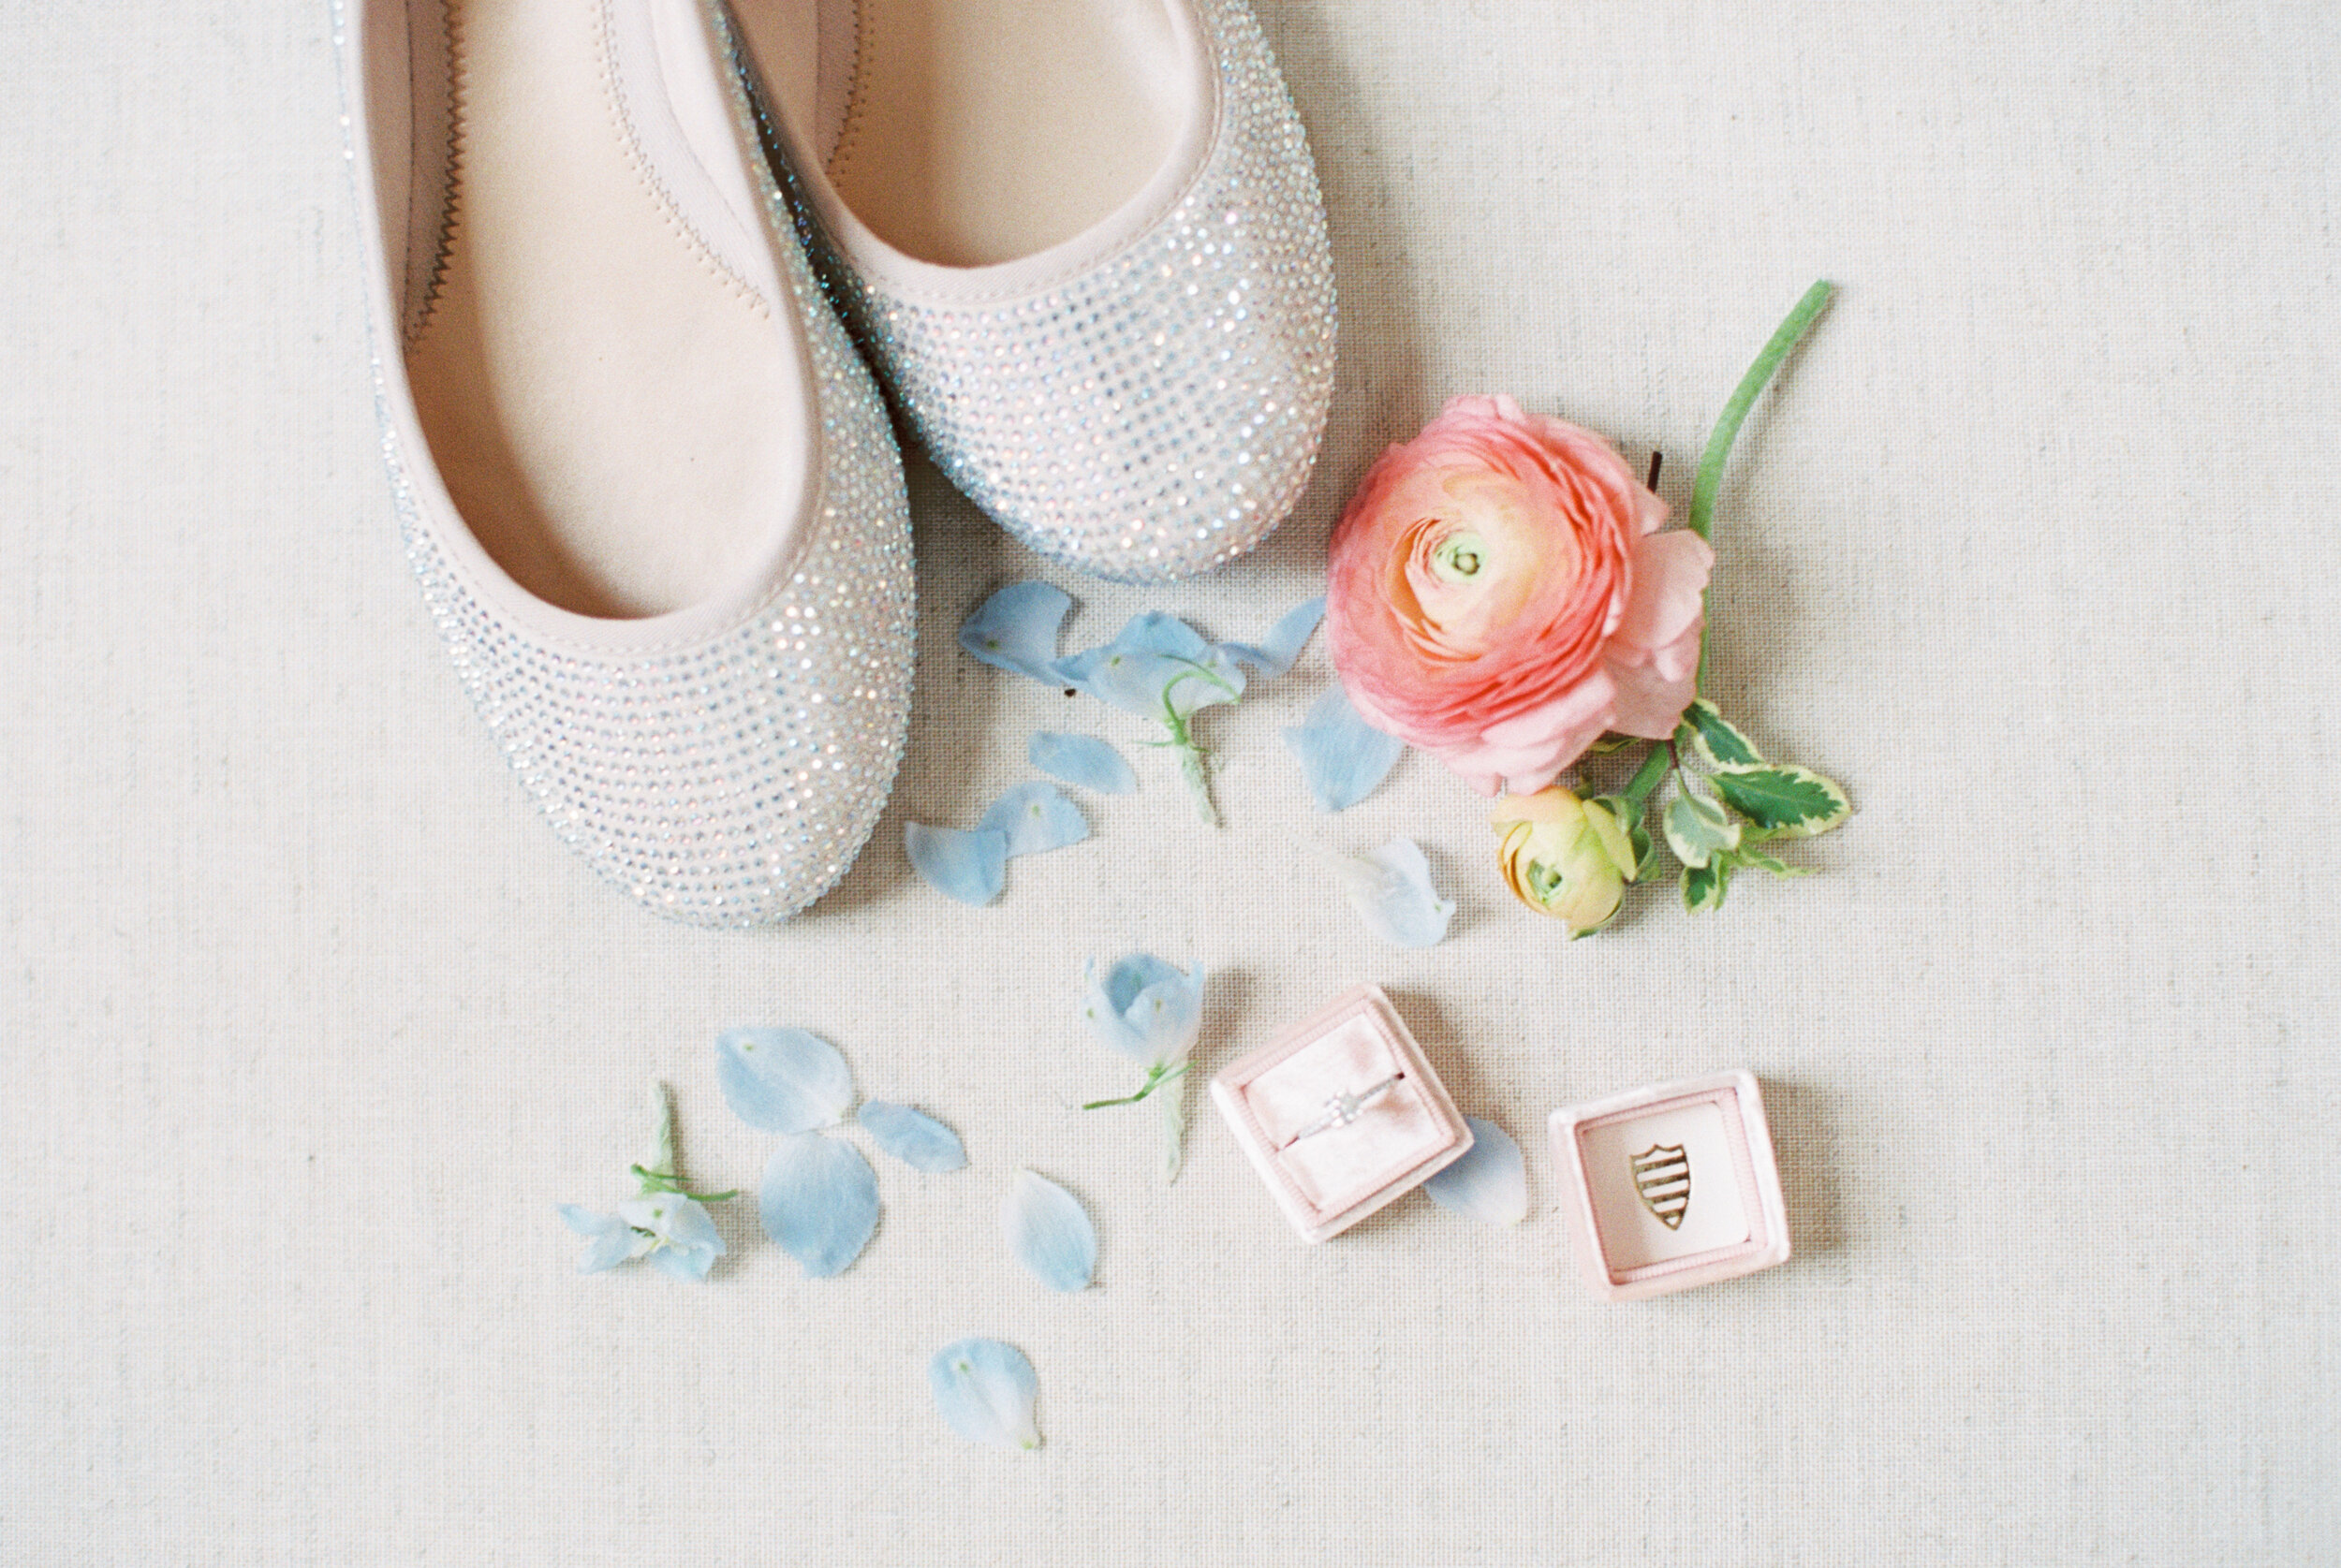 Ford wedding - shoes, petals, florals, ring - Lowdnes Grove - Ava Moore Photography - Charleston Wedding Planner.jpg